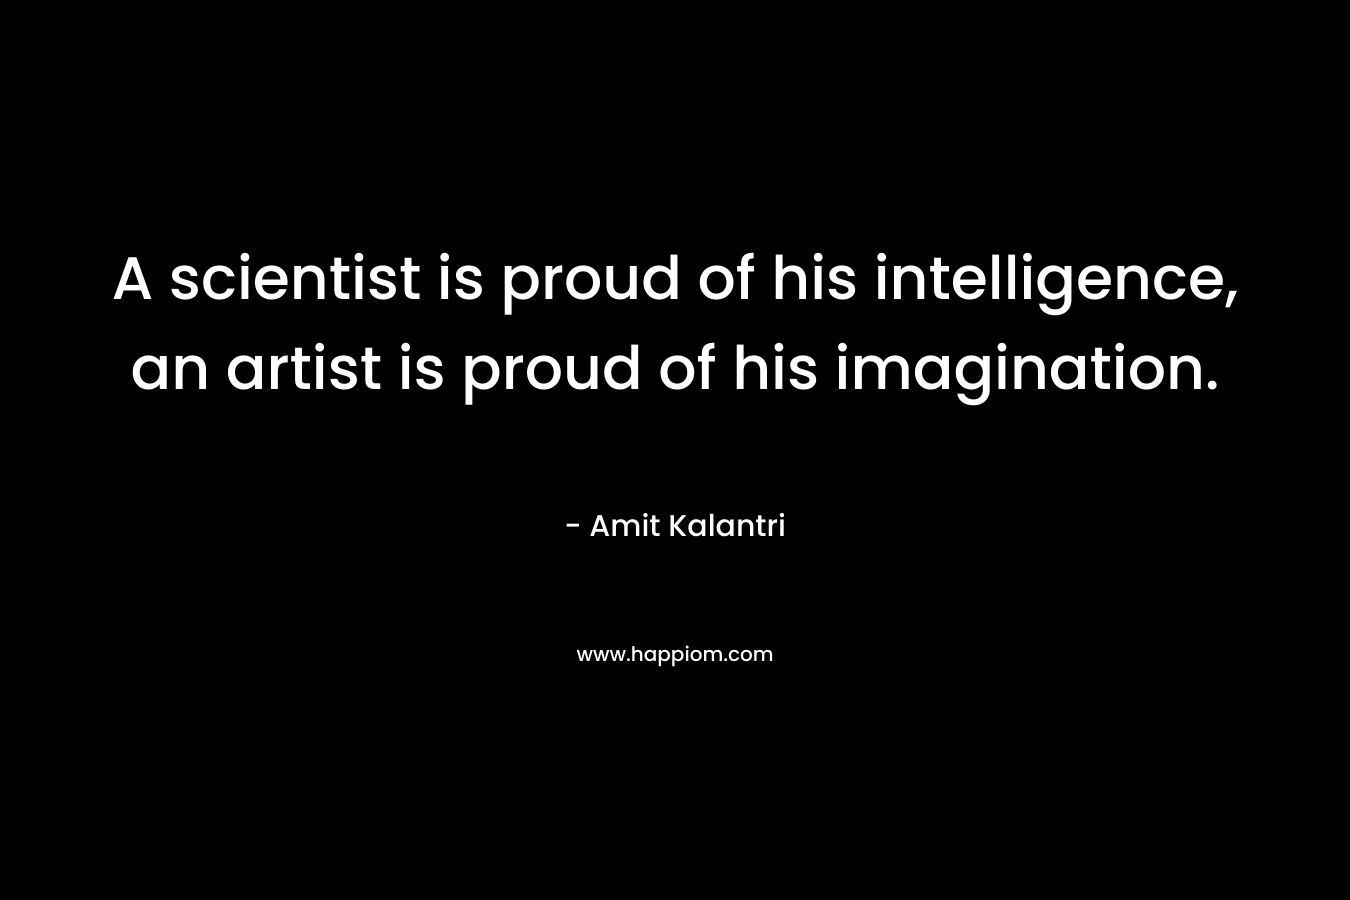 A scientist is proud of his intelligence, an artist is proud of his imagination.